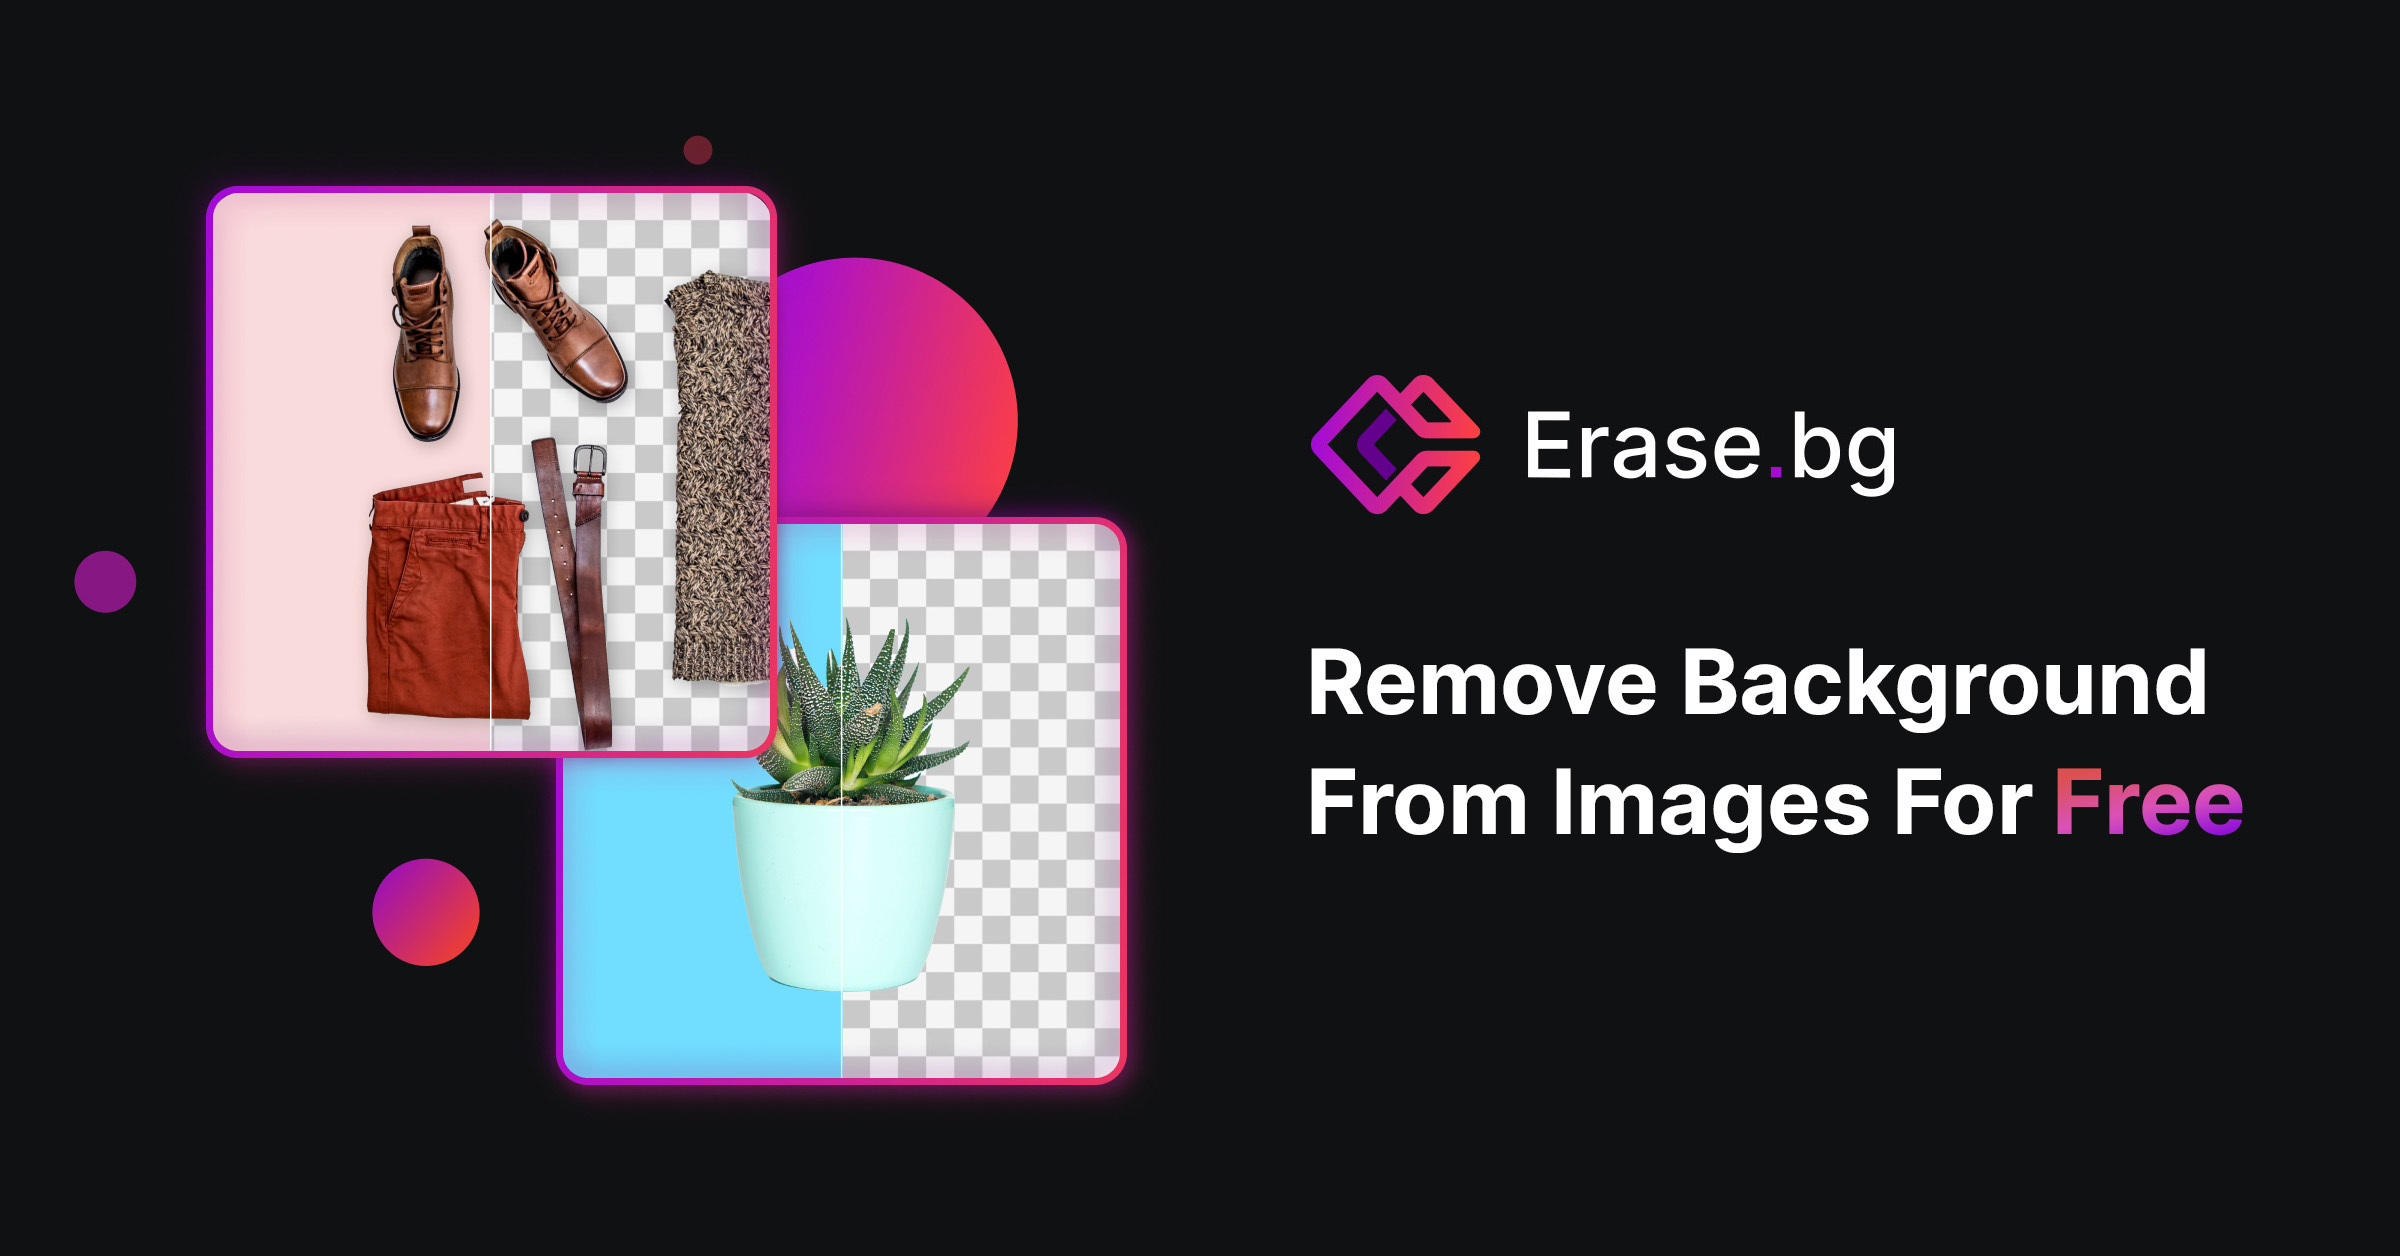 Remove Background From Image : Free Bg Remover For Hd Photos Online - Erase. Bg